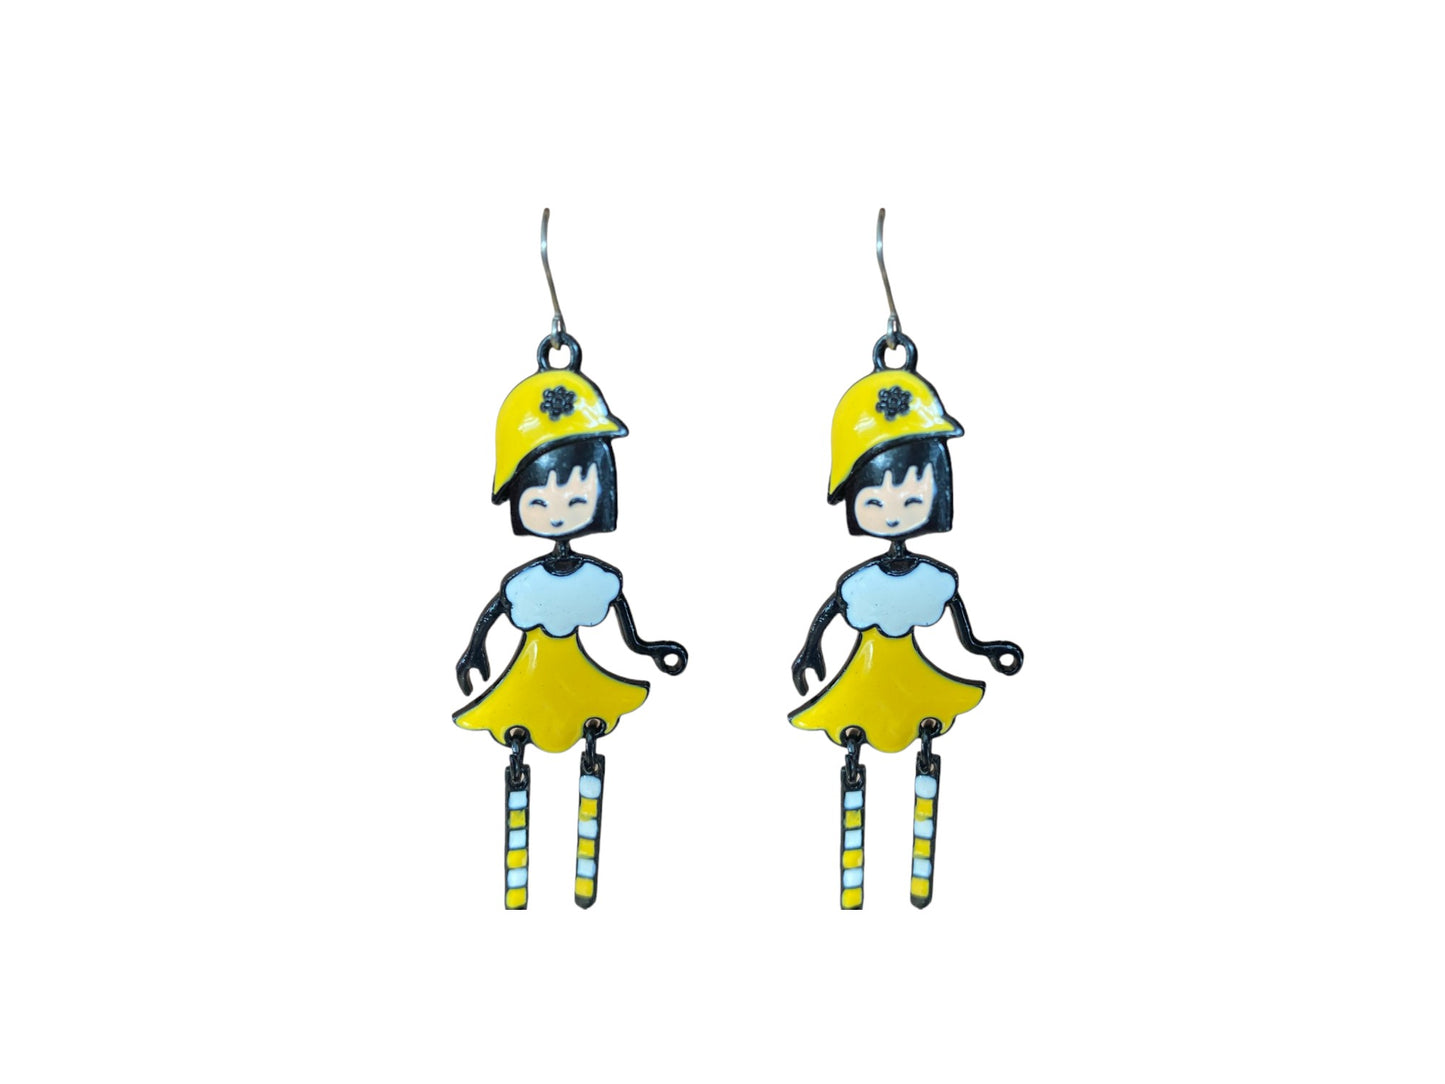 Harajuku Girl Charm Drop Earrings yellow with a titanium hook on a white background